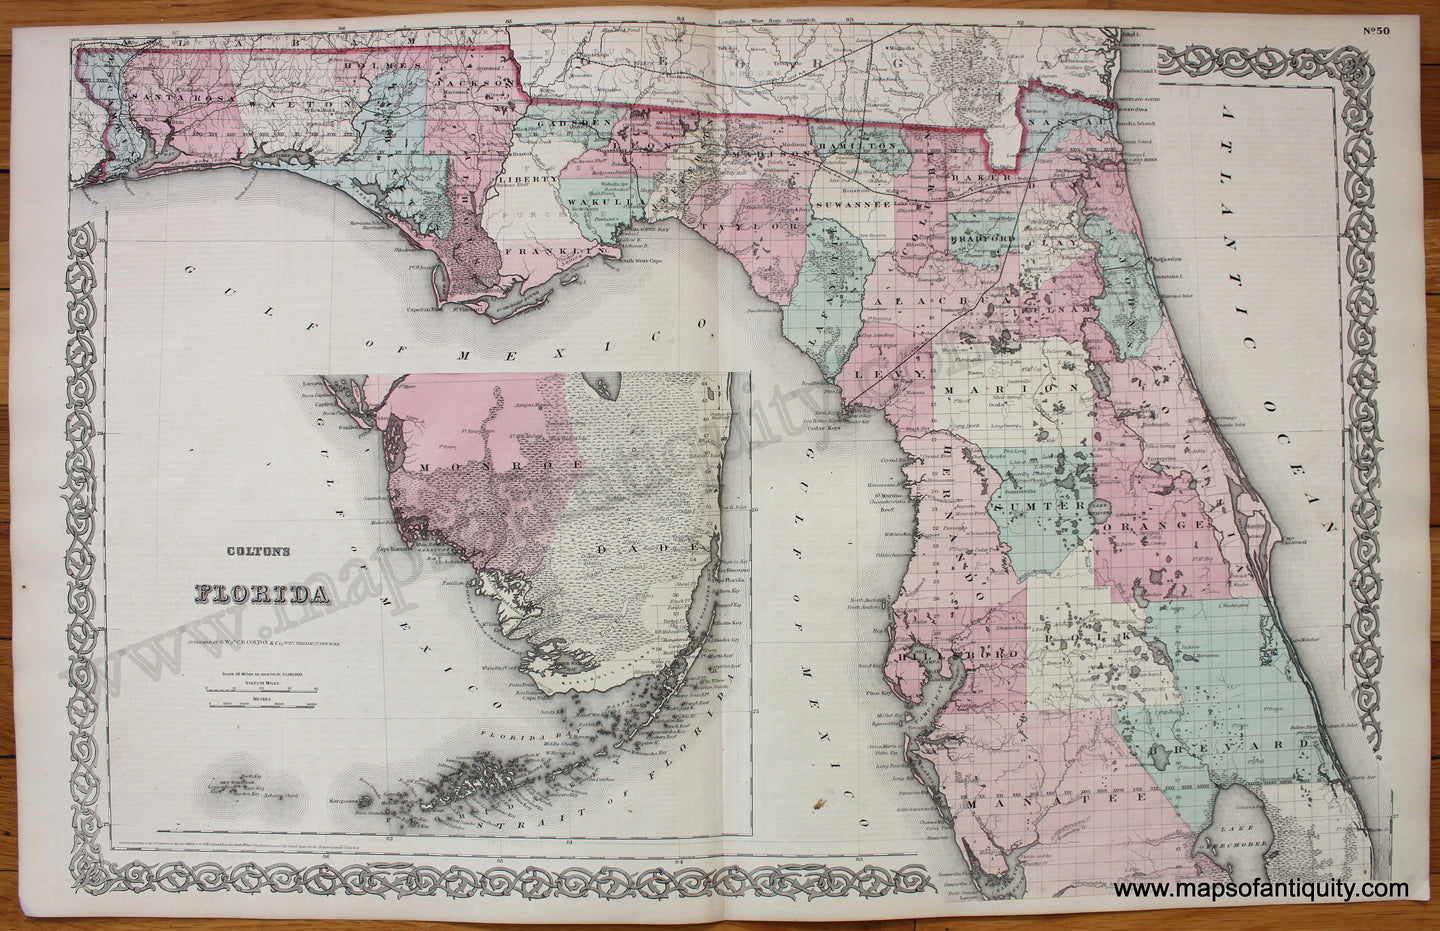 Antique-Hand-Colored-Map-Colton's-Florida-United-States-Florida-1868-Colton-Maps-Of-Antiquity